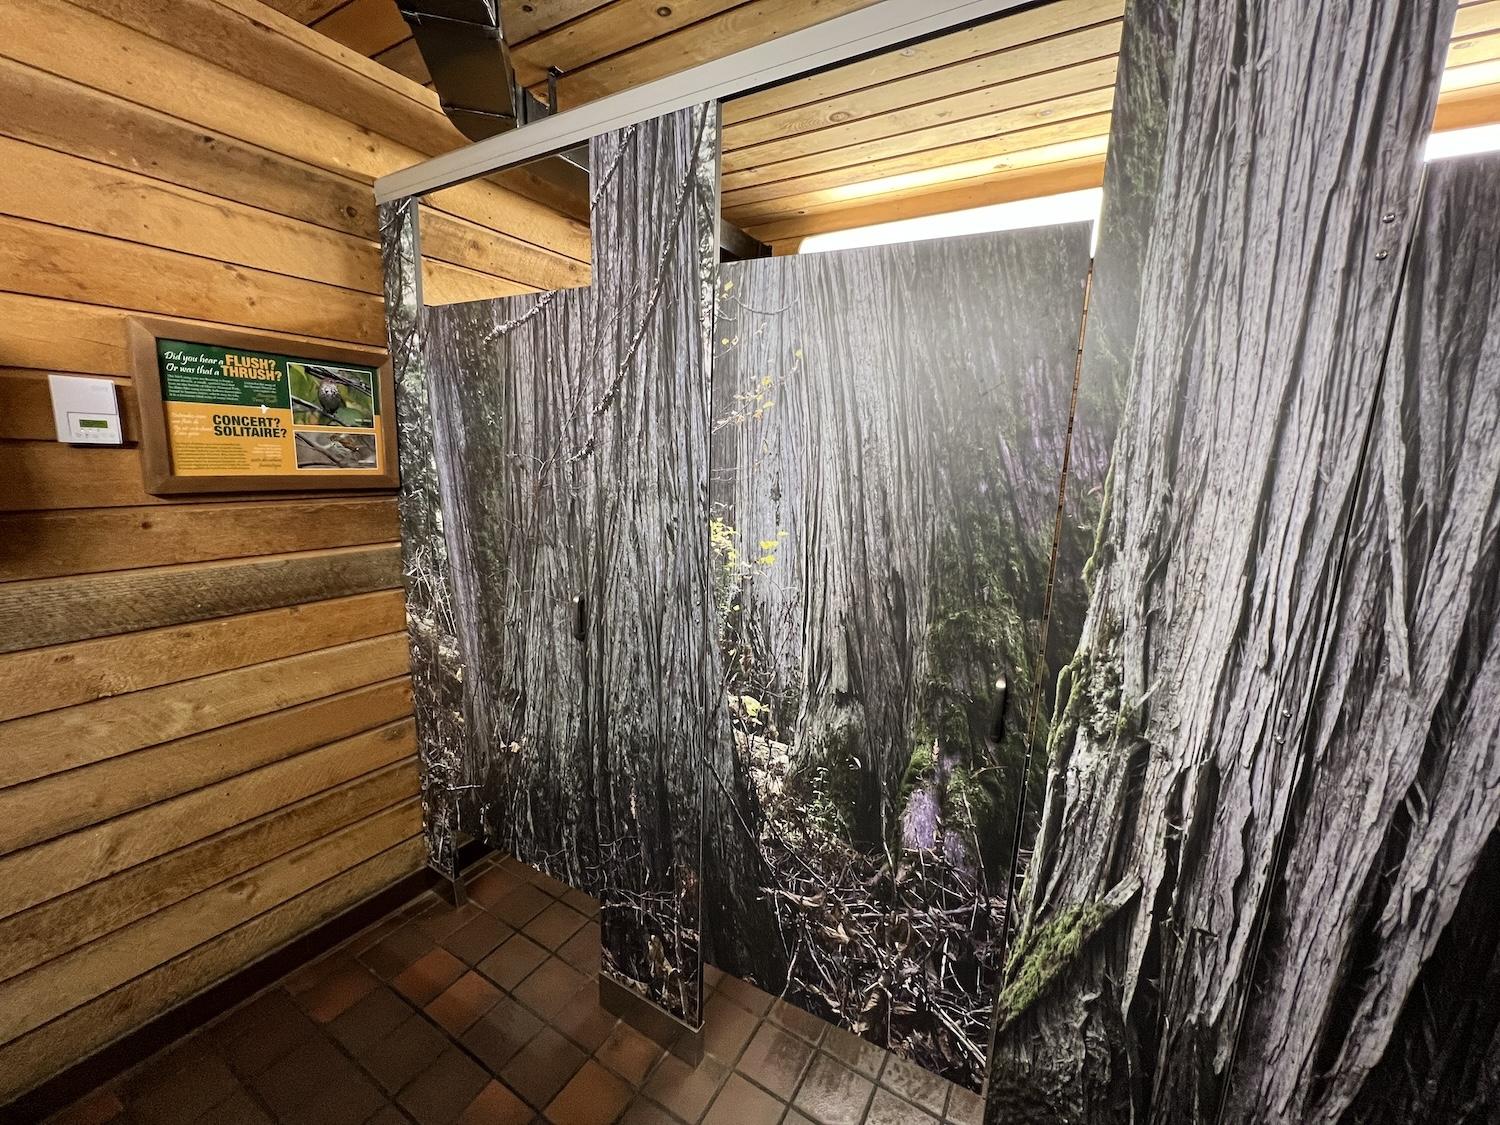 Bird songs from the hermit thrush are piped into the bathroom at the Rogers Pass Discovery Centre in Glacier National Park.